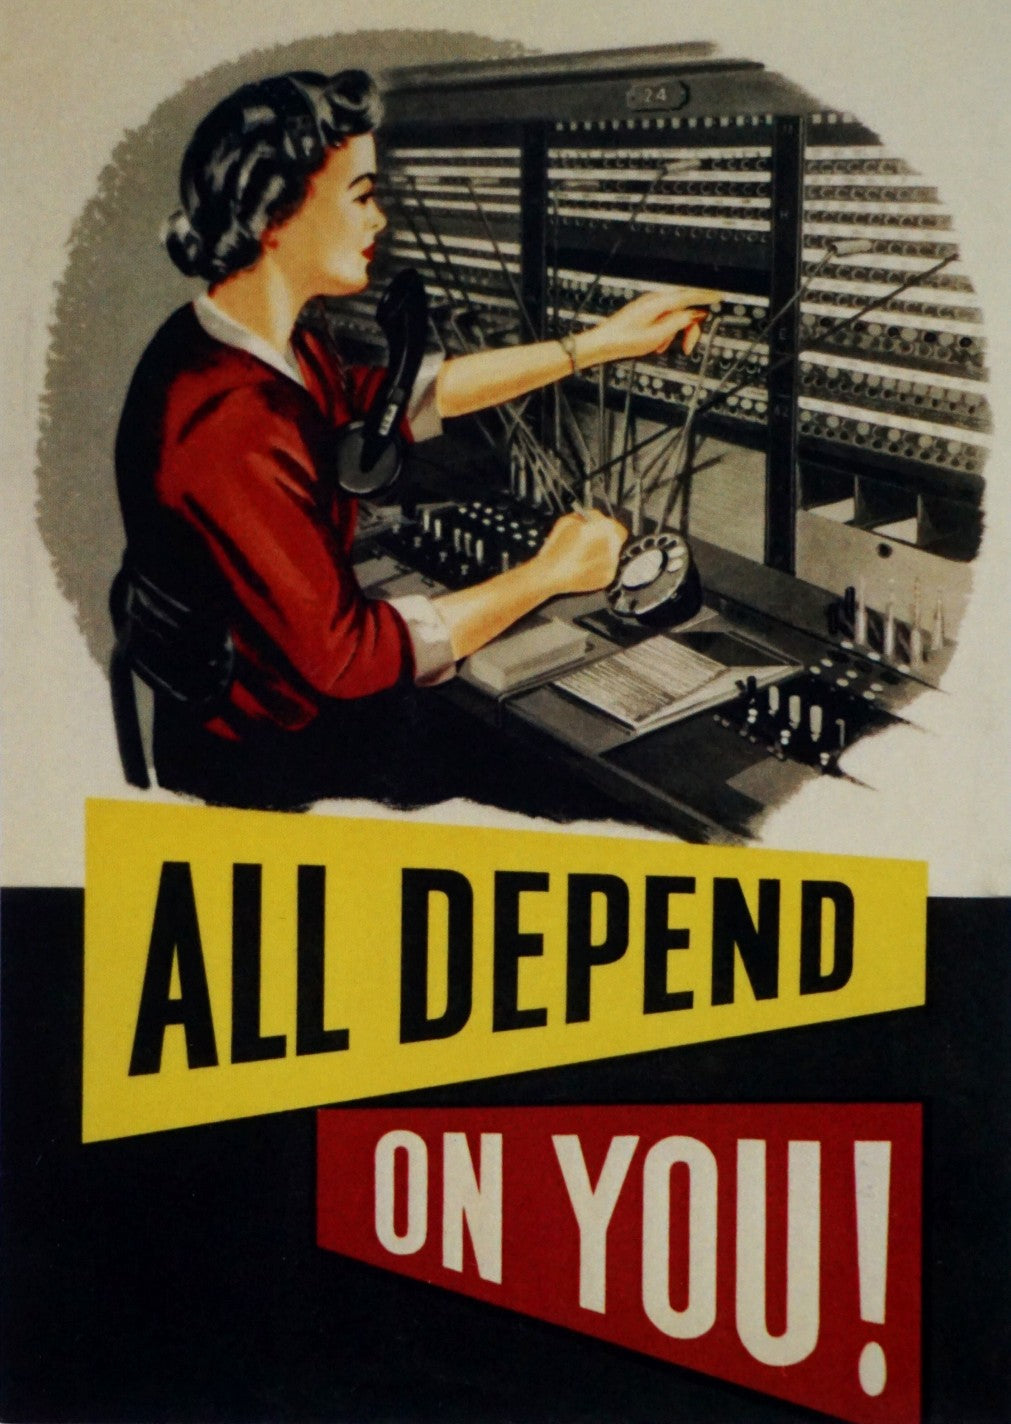 All depend on you Postcard